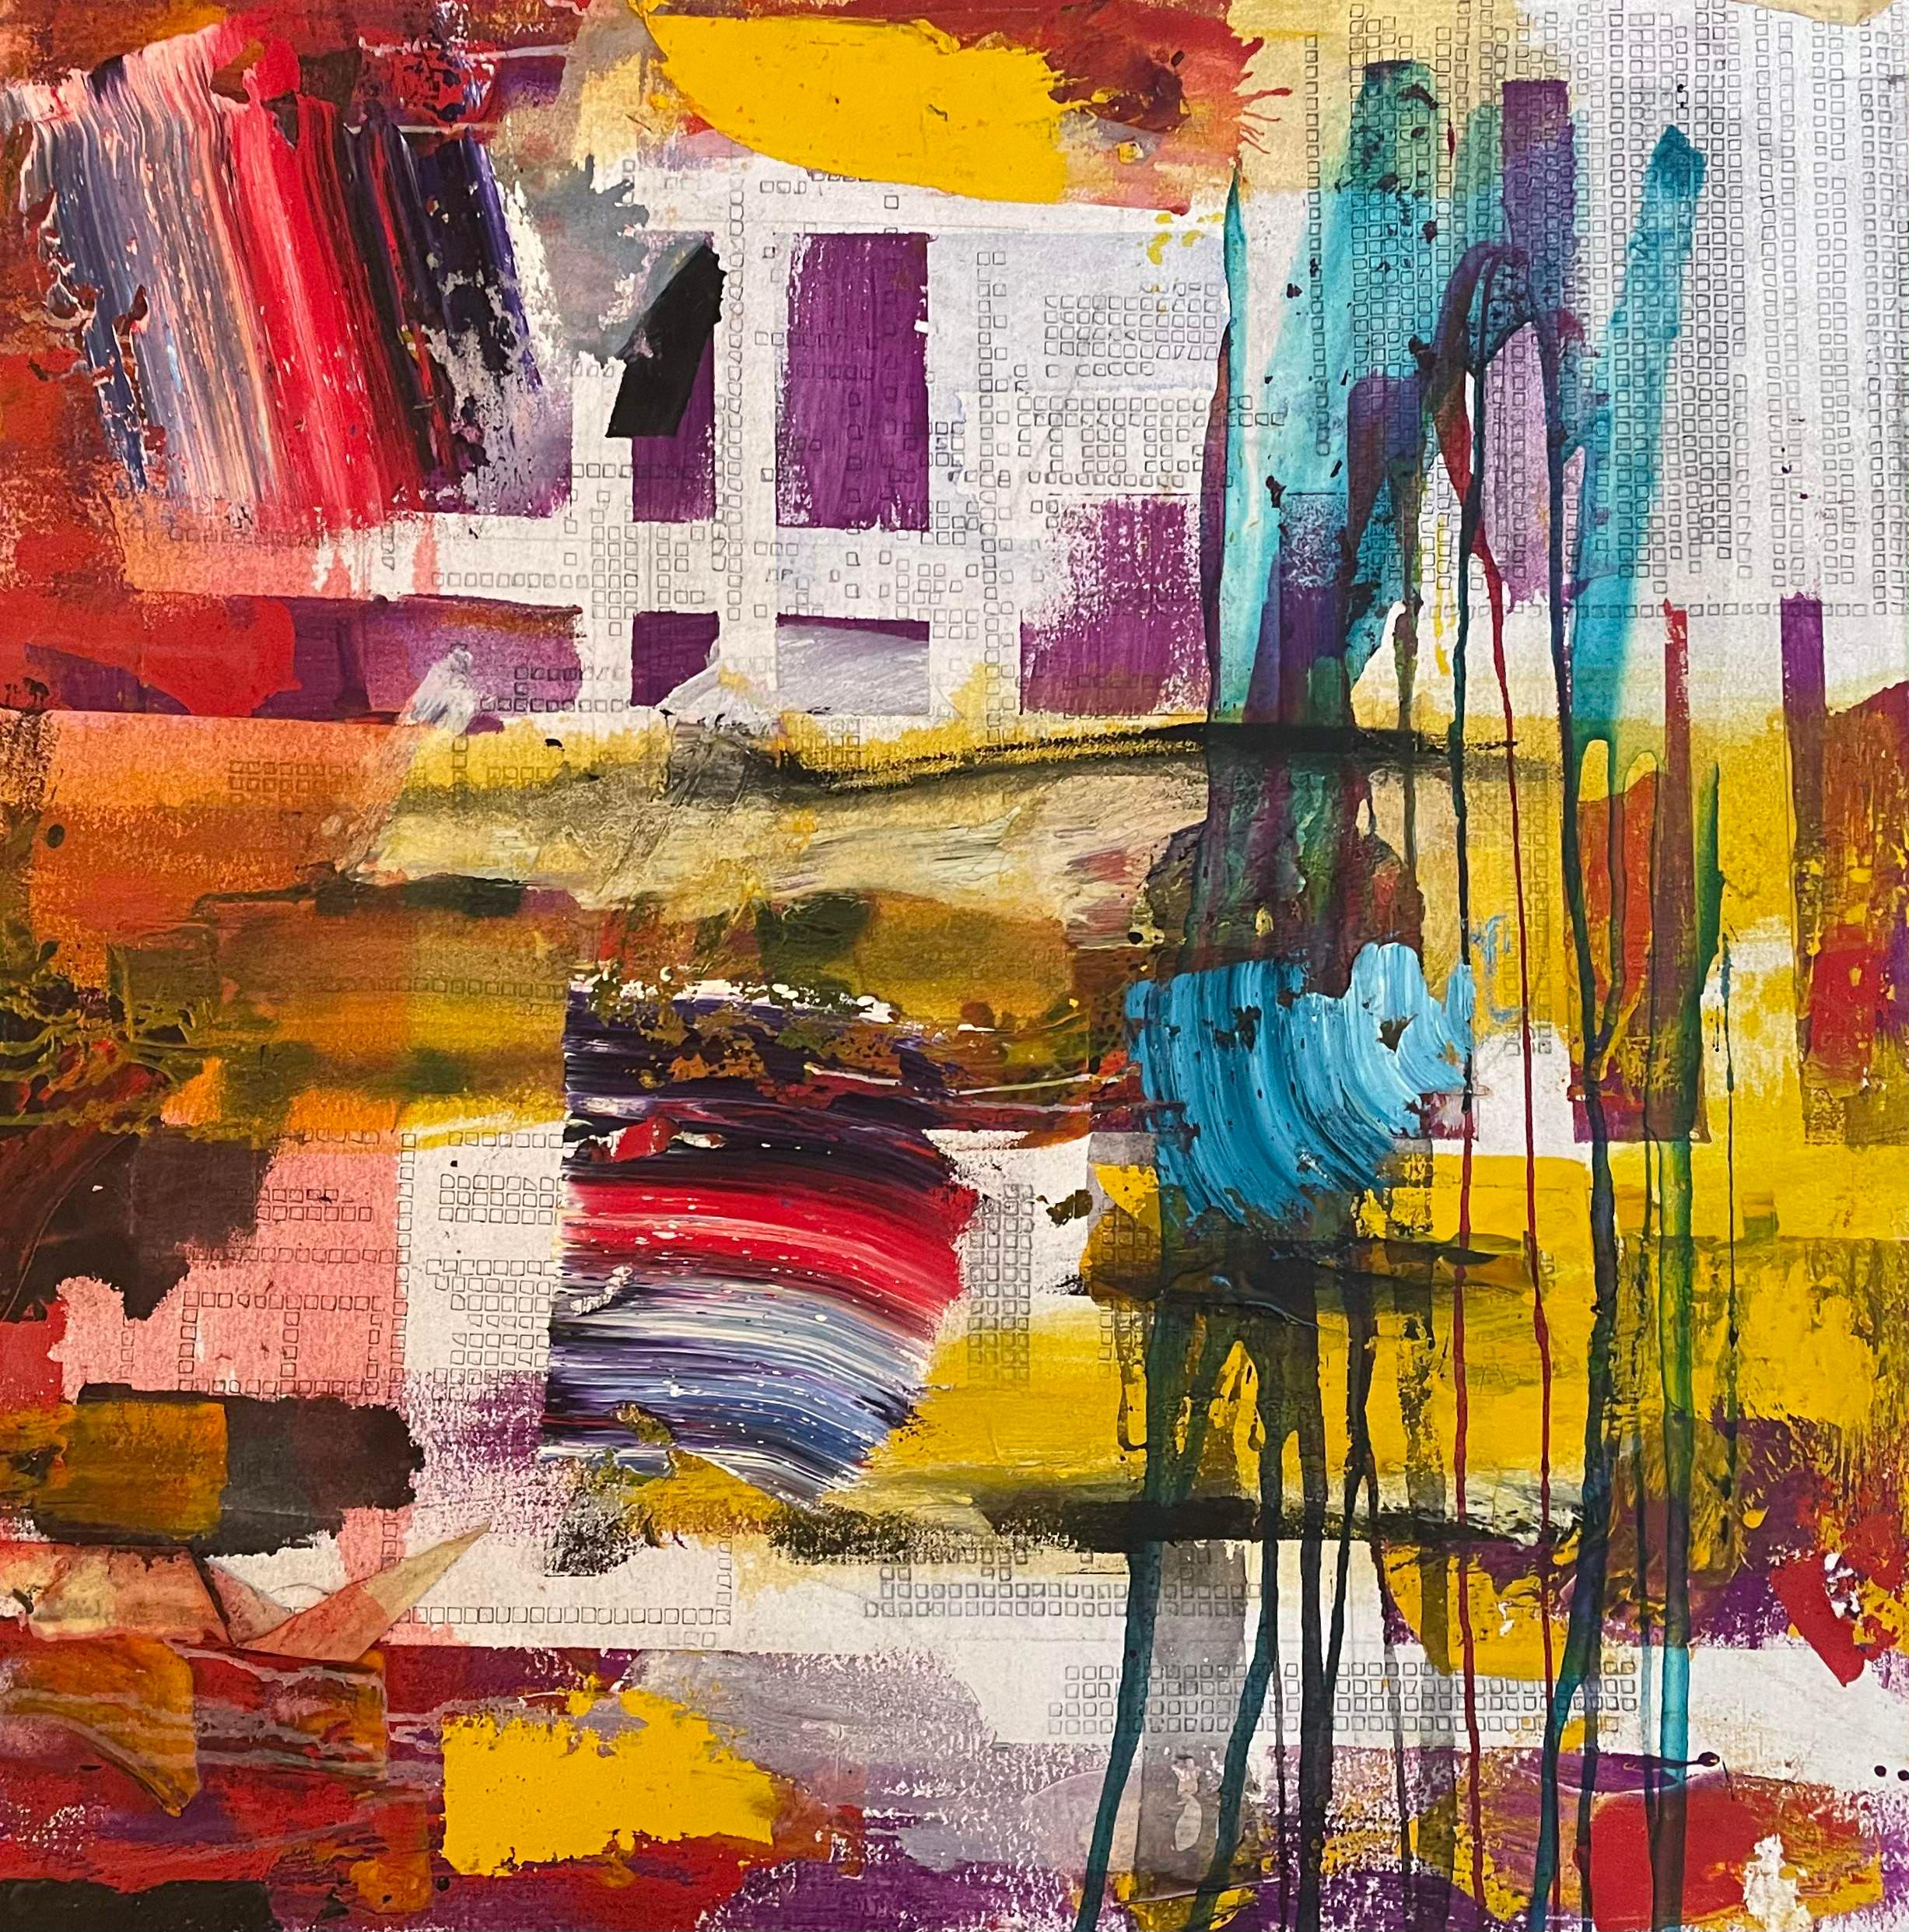 'Disorder' by Steven H. Rehfeld - Colorful Mixed Media Contemporary Abstract 